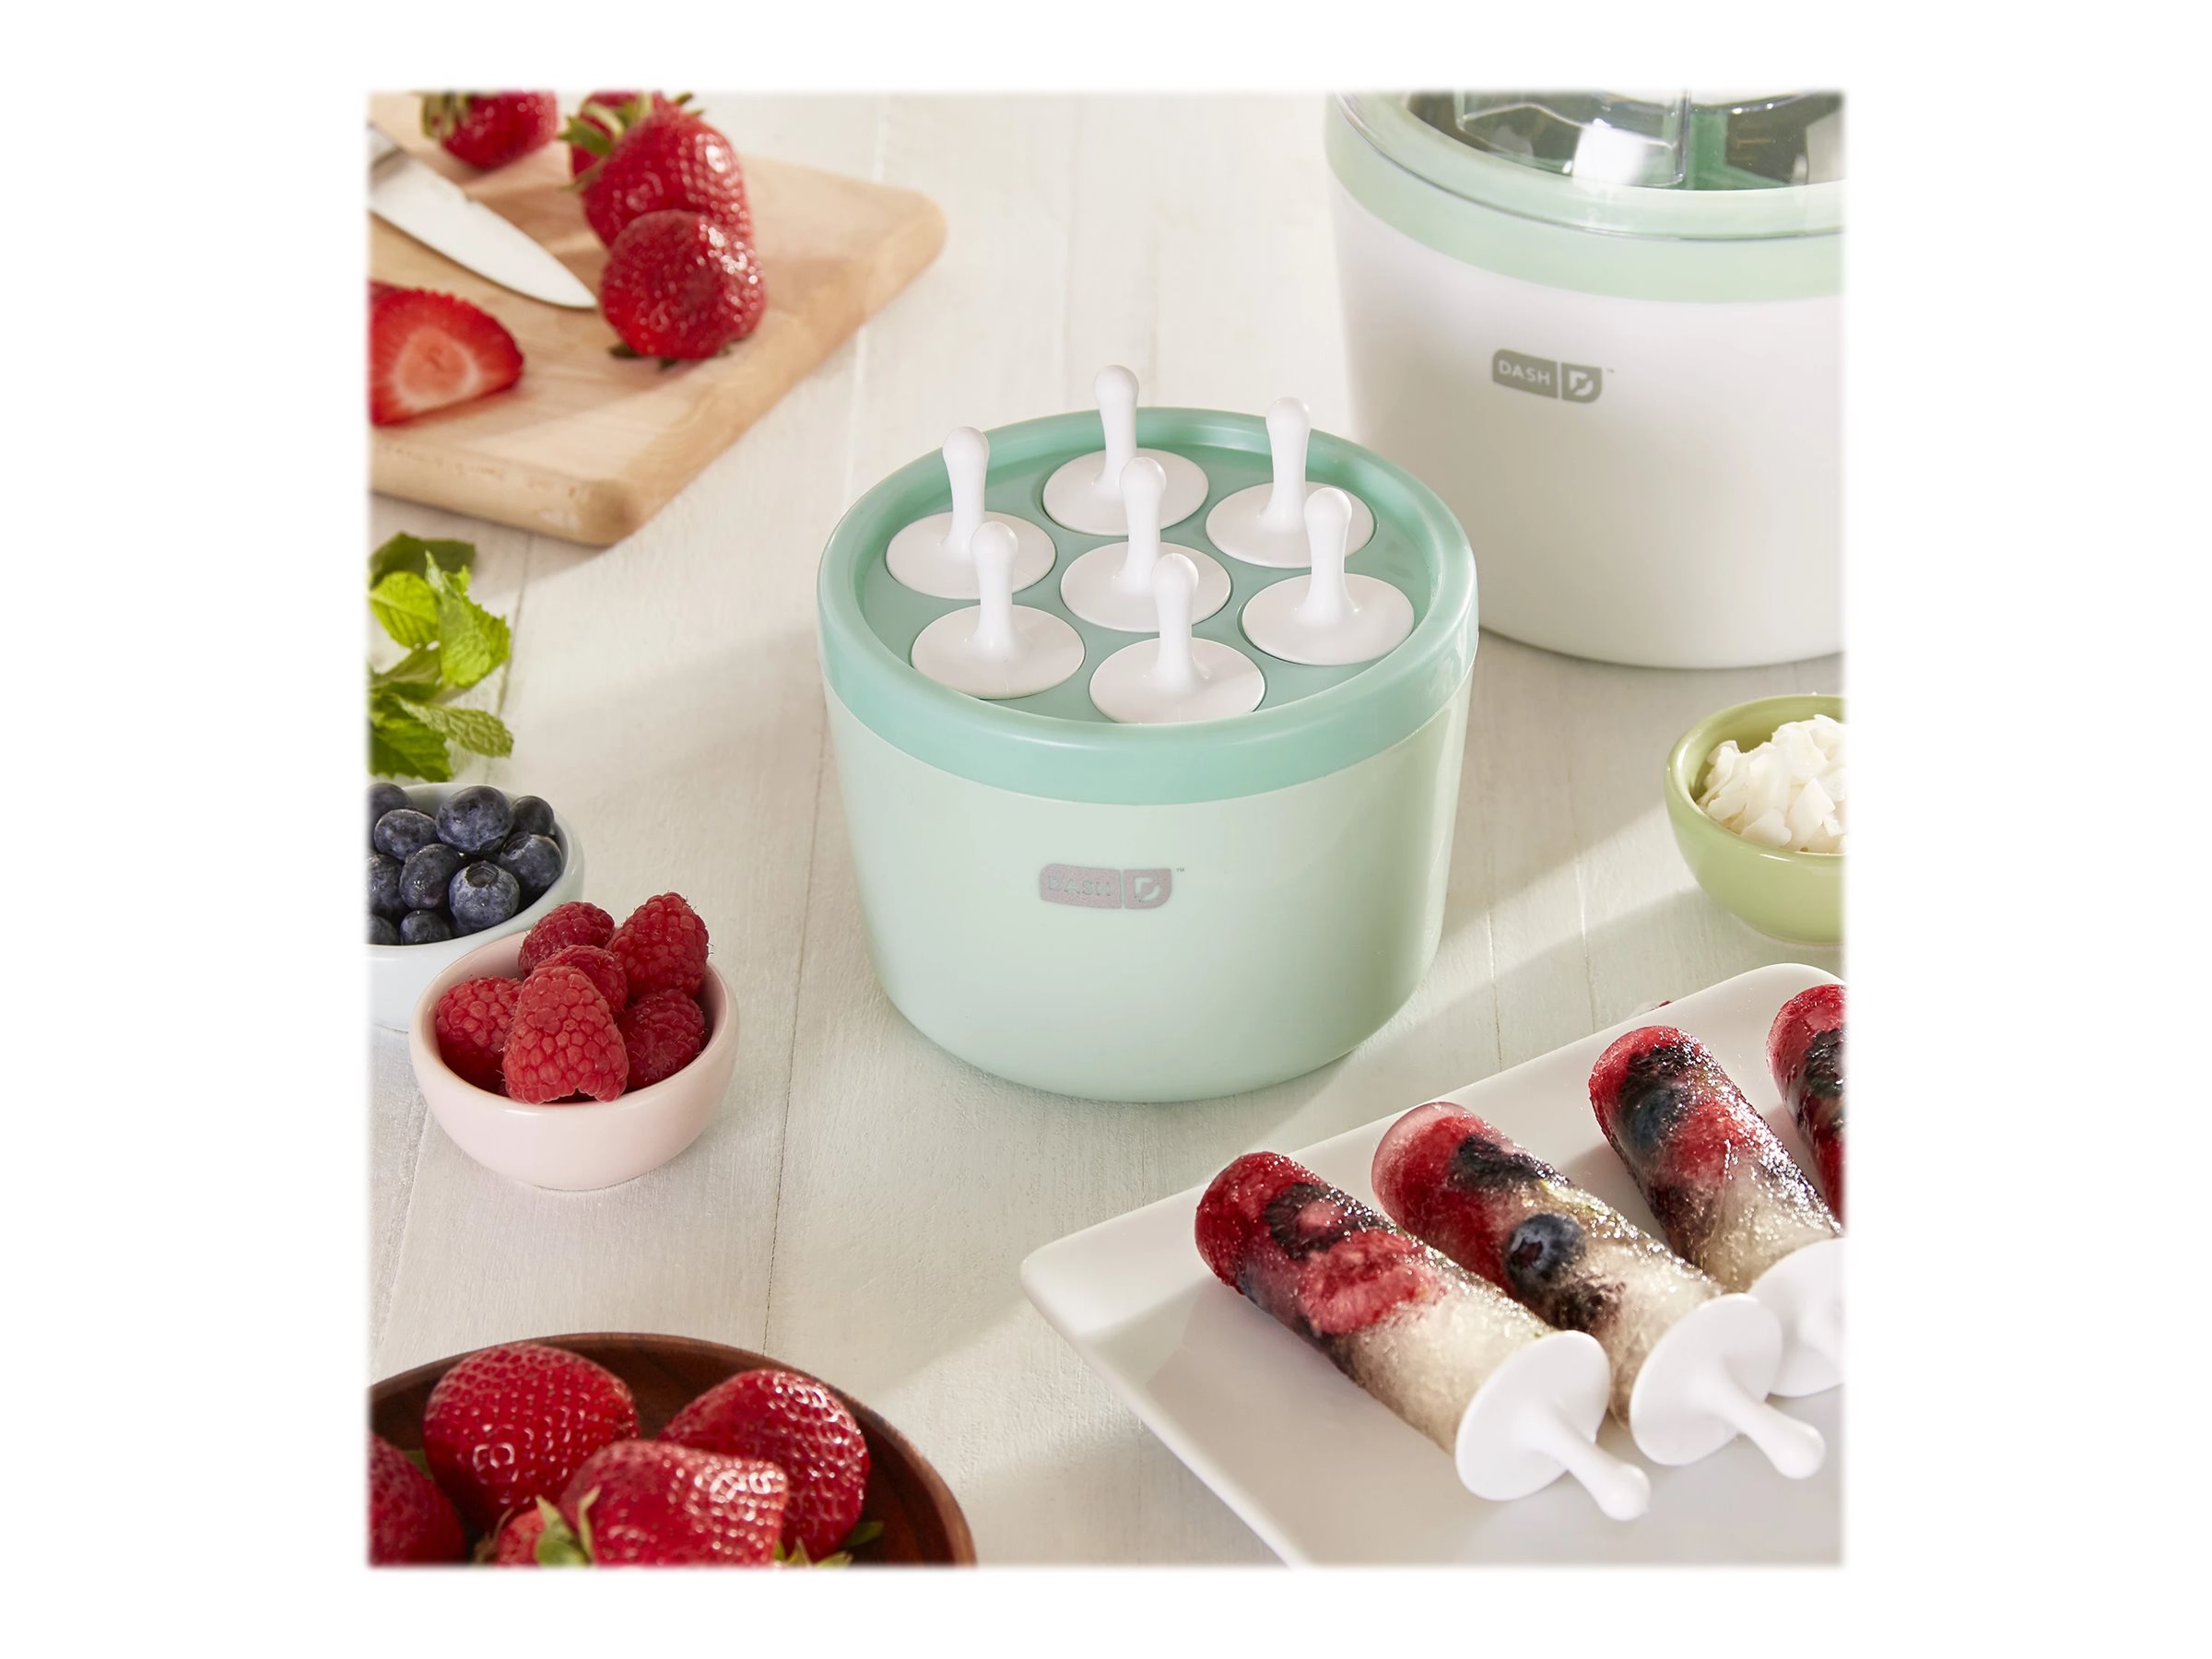 Rise by Dash RPIC100GBSK04 Ice Cream Maker, Blue – Toolbox Supply